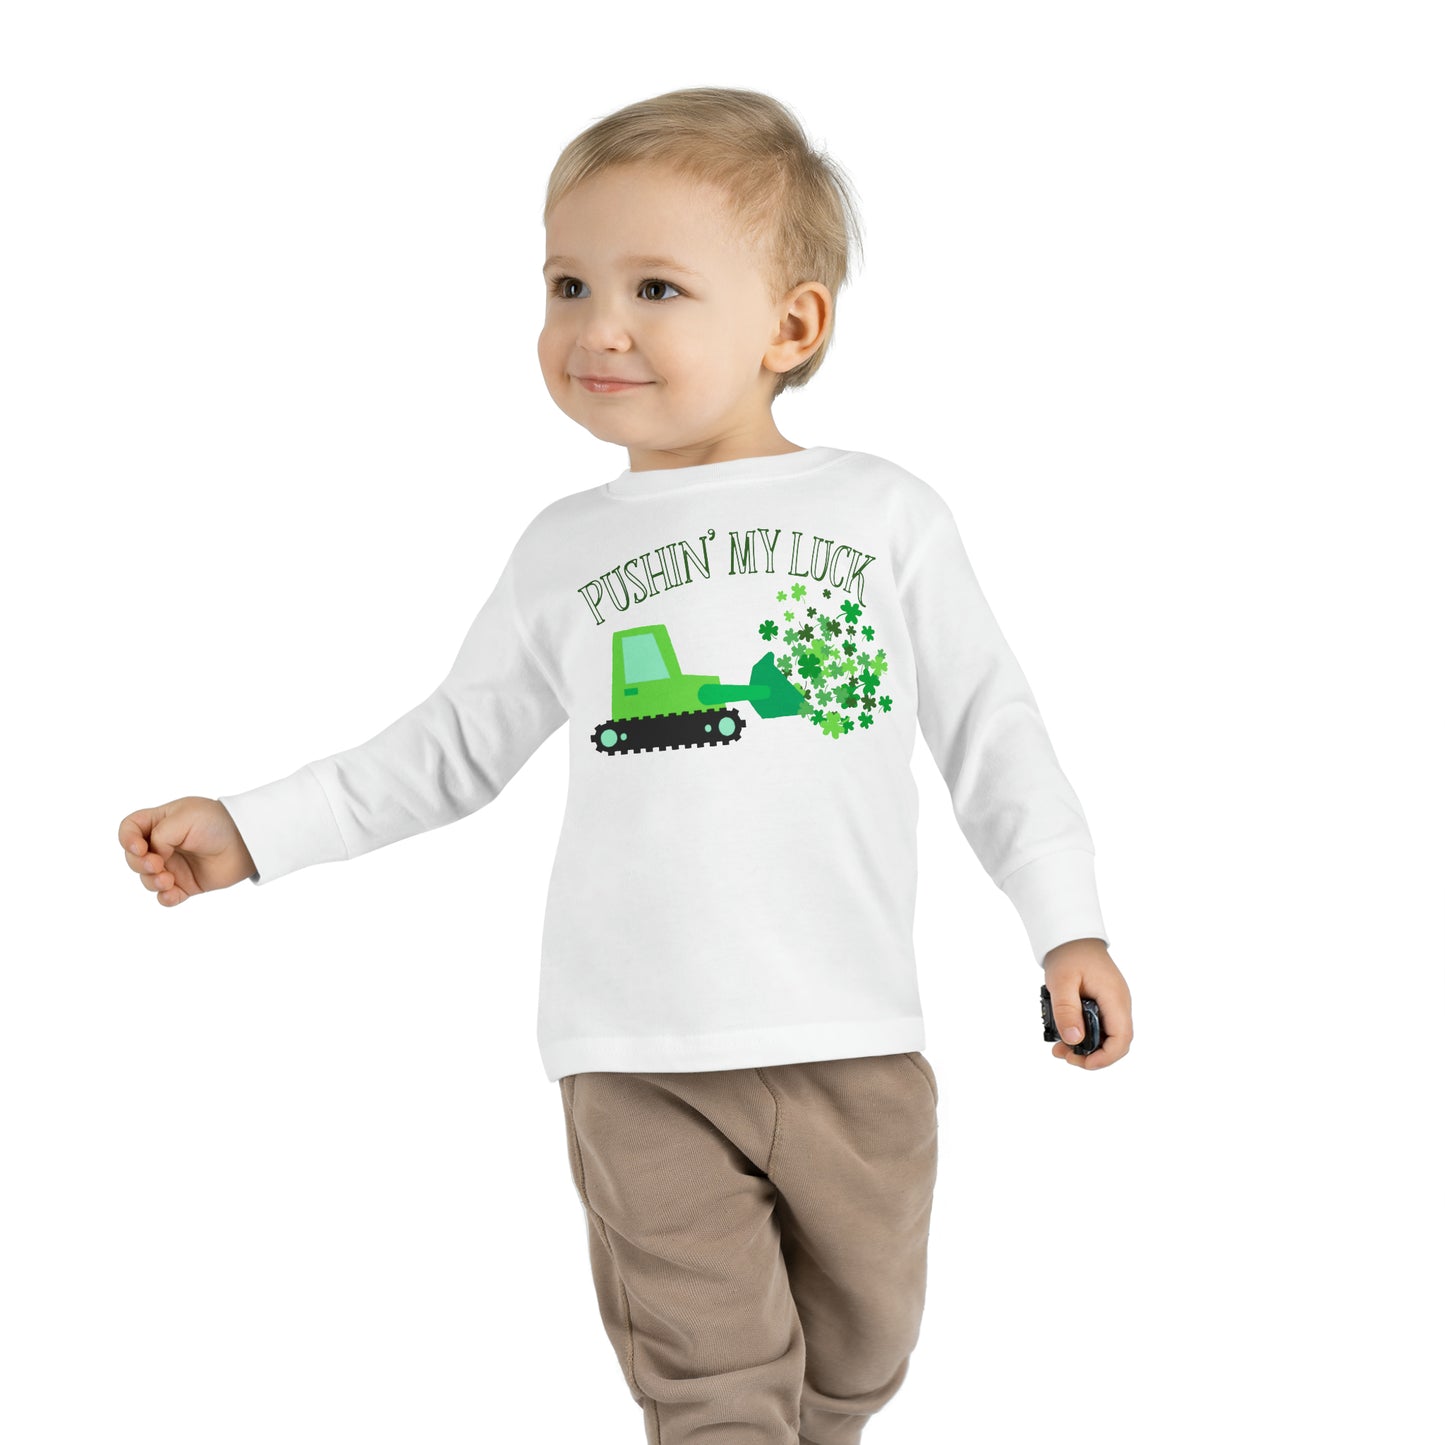 Pushin' My Luck | Bulldozer Toddler Long Sleeve Tee for St. Patrick's Day